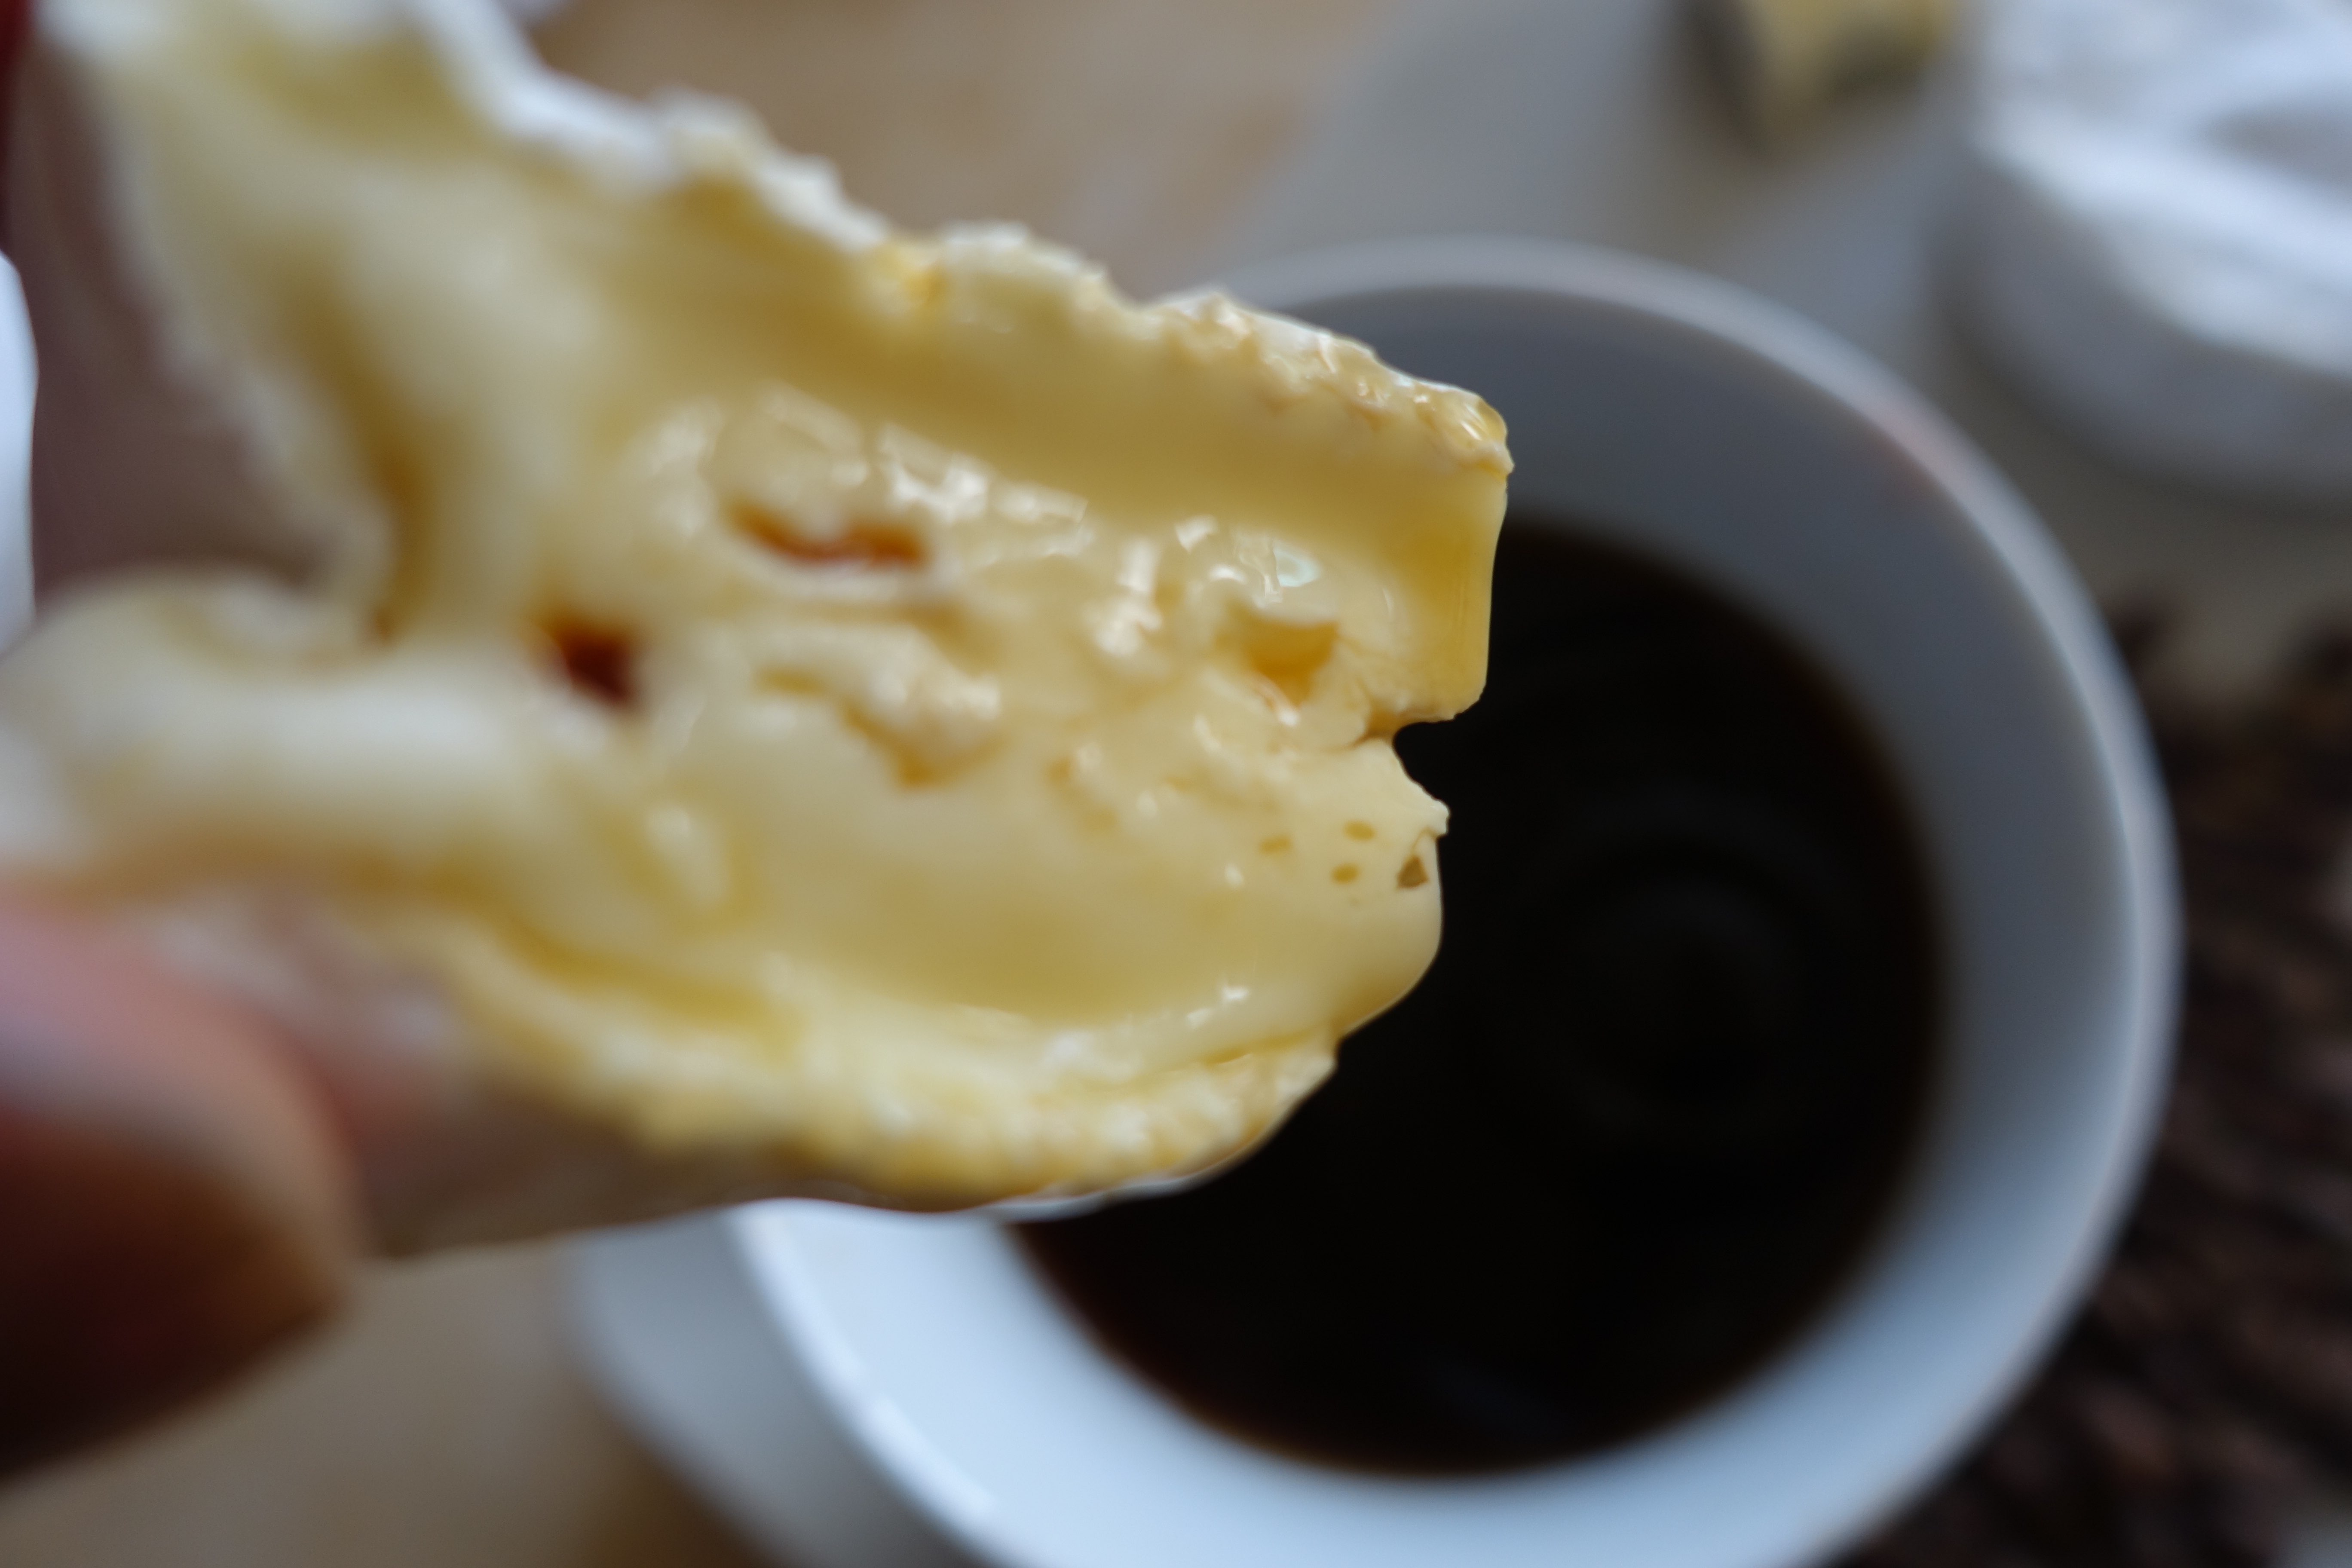 Cheese dunked in coffee.